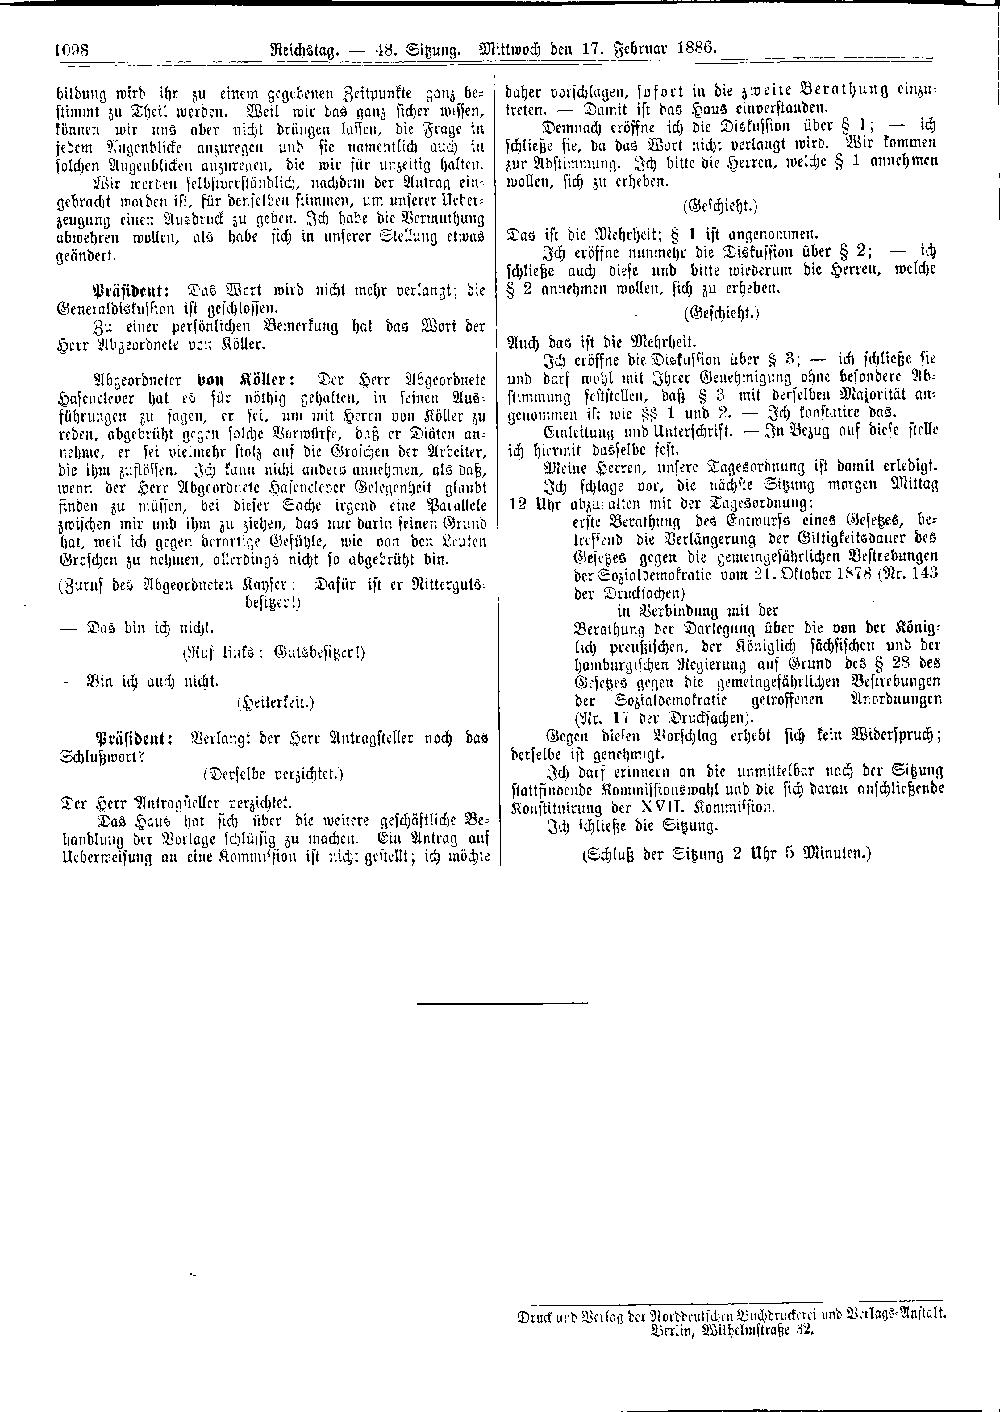 Scan of page 1098